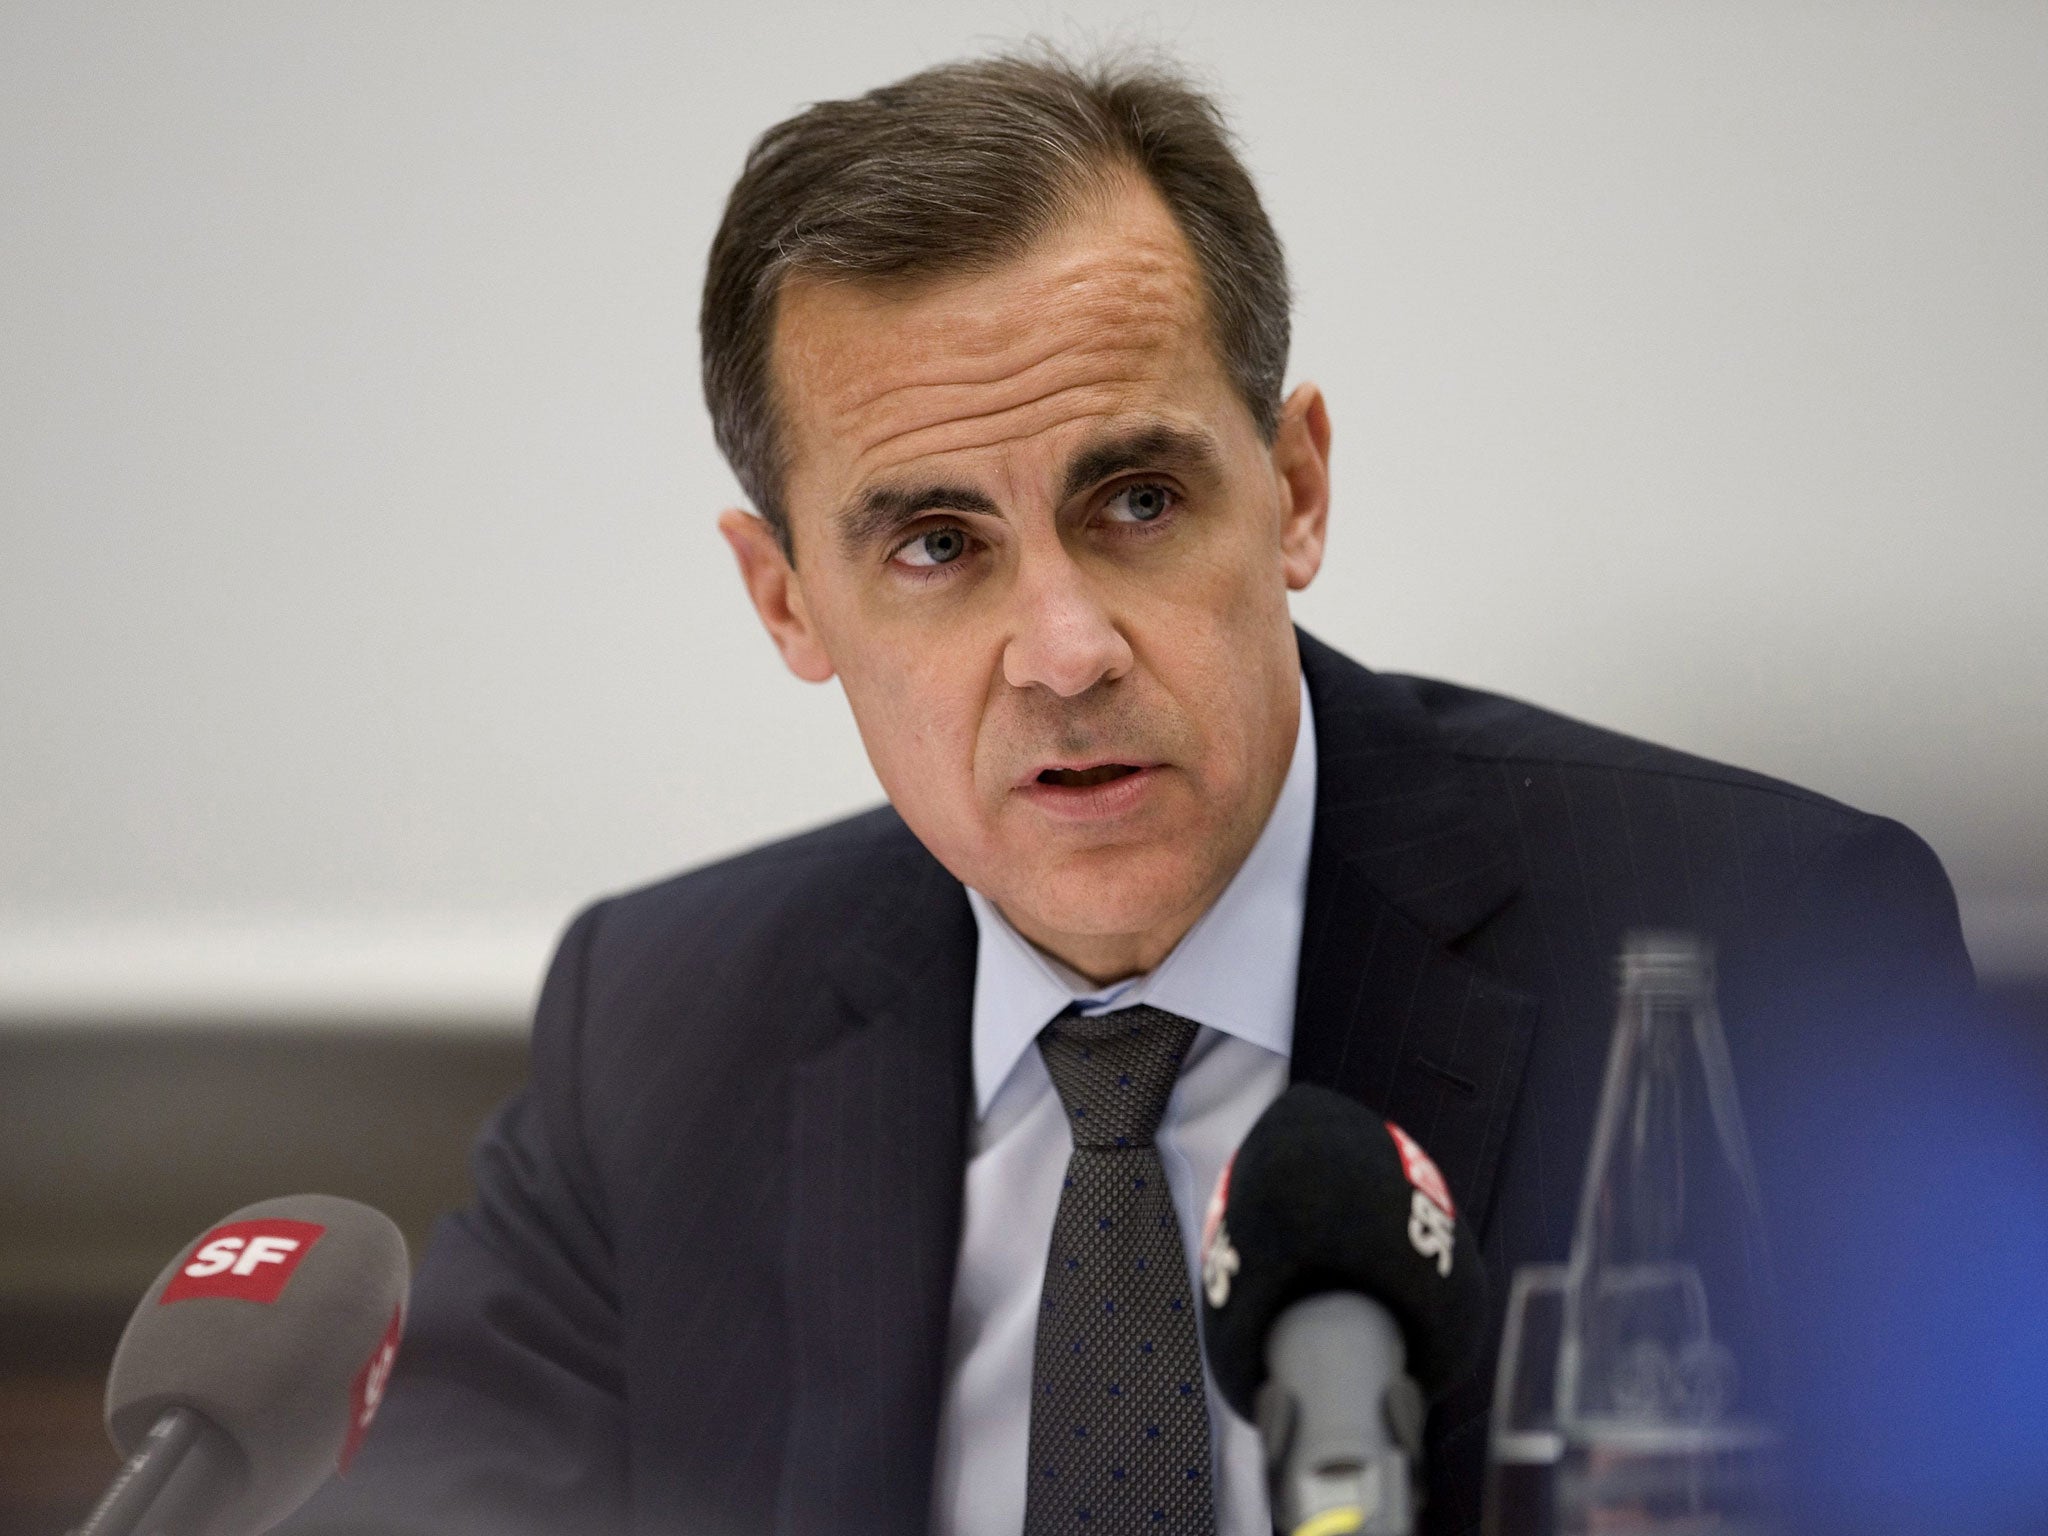 Mark Carney has been named as the new Bank of England Governor